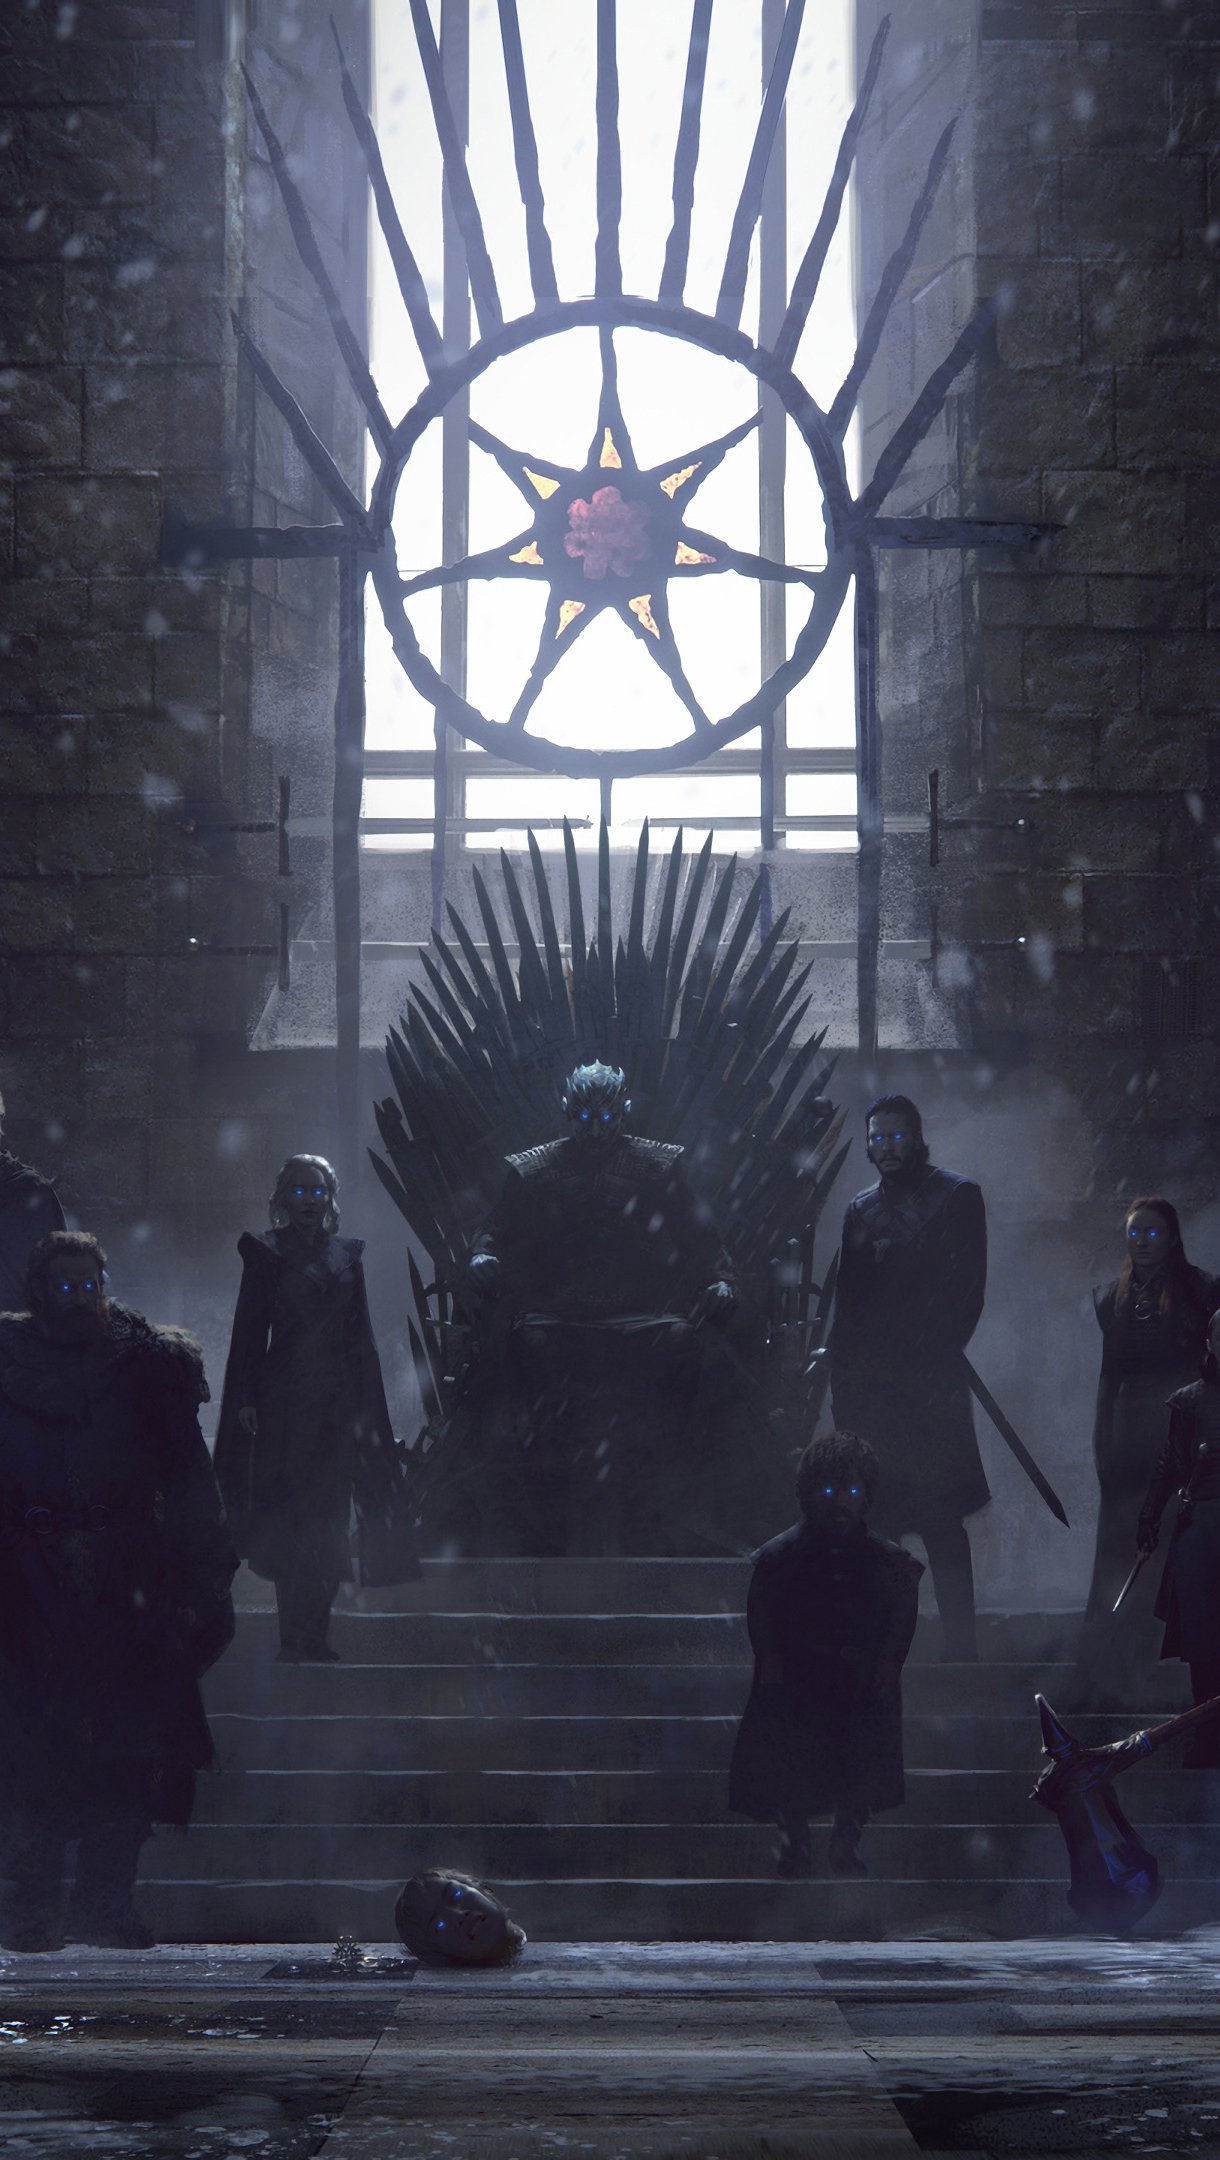 Game of Thrones Iron Throne Characters Wallpaper 4k Ultra HD ID:3190